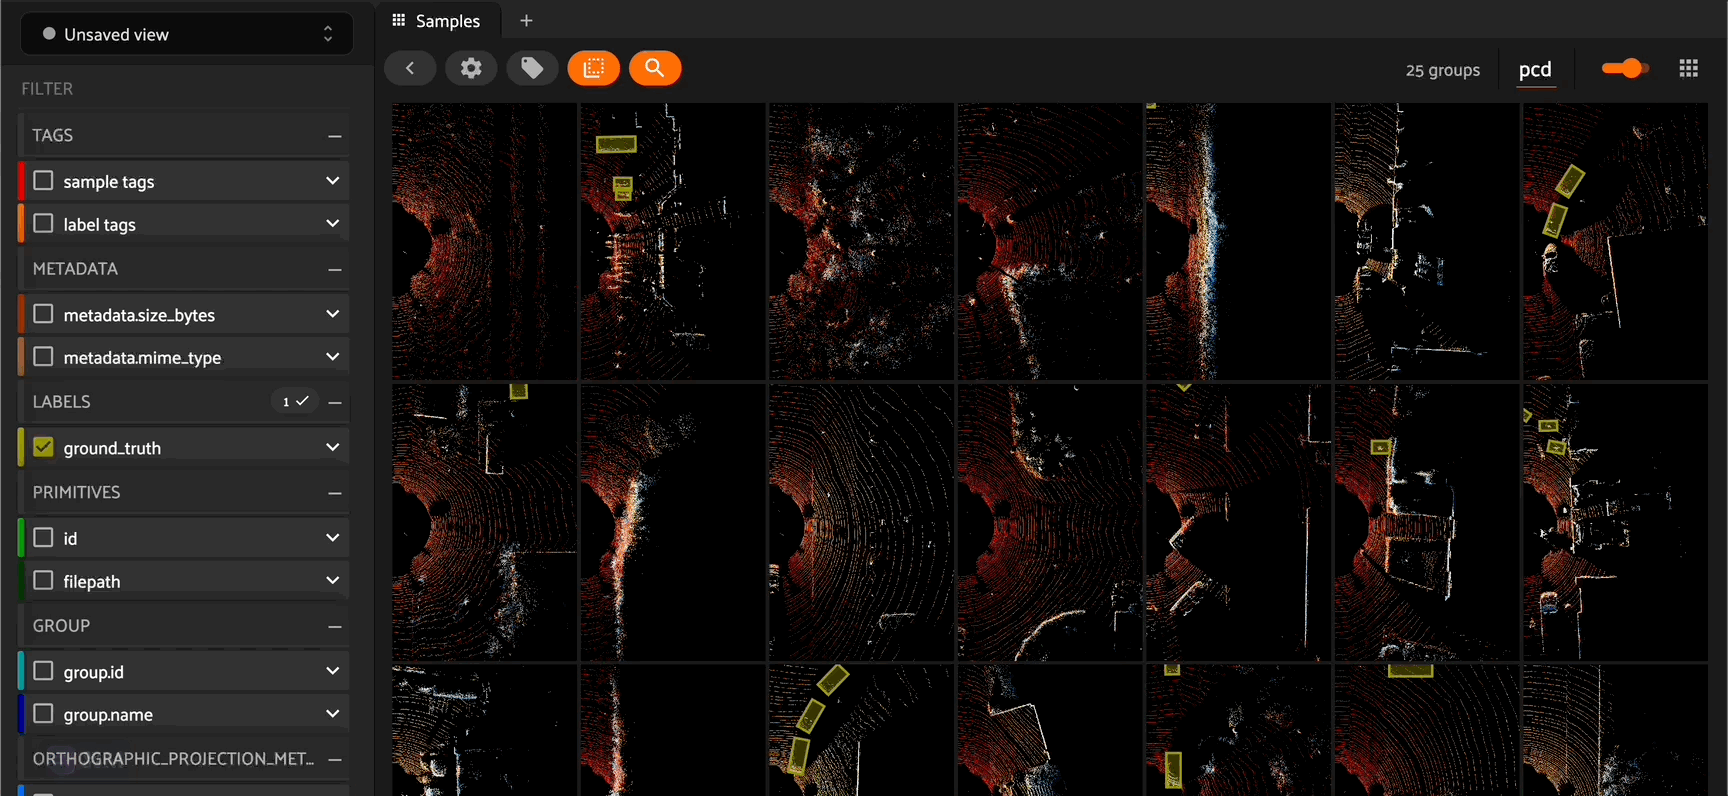 Bird's eye view images for a grouped dataset with multiple point cloud slices